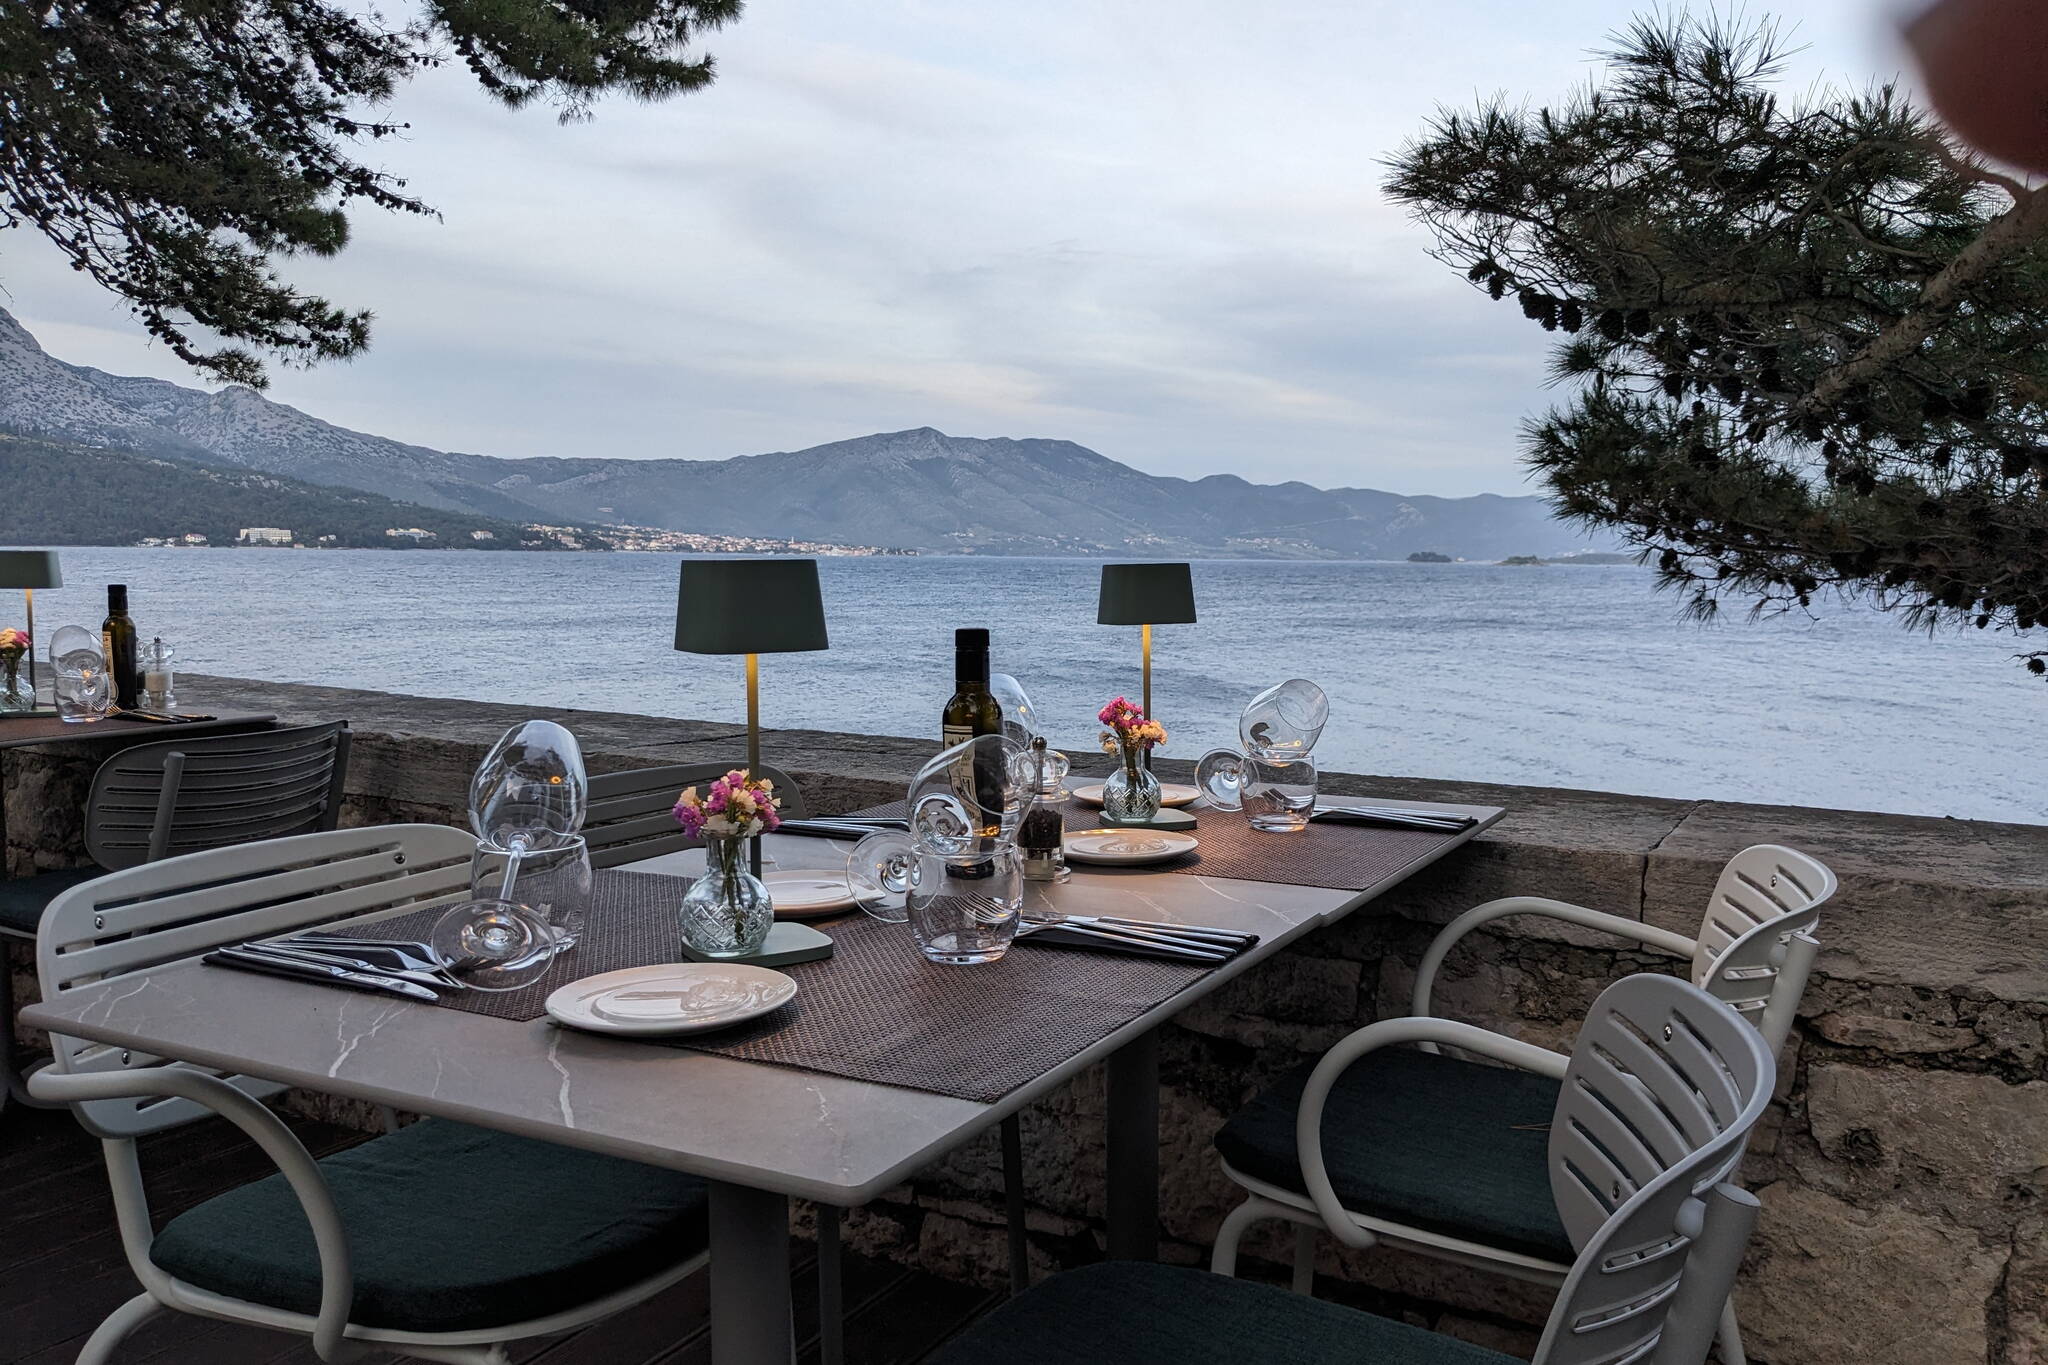 Dining out in Croatia. (Photo by Patty Schied)